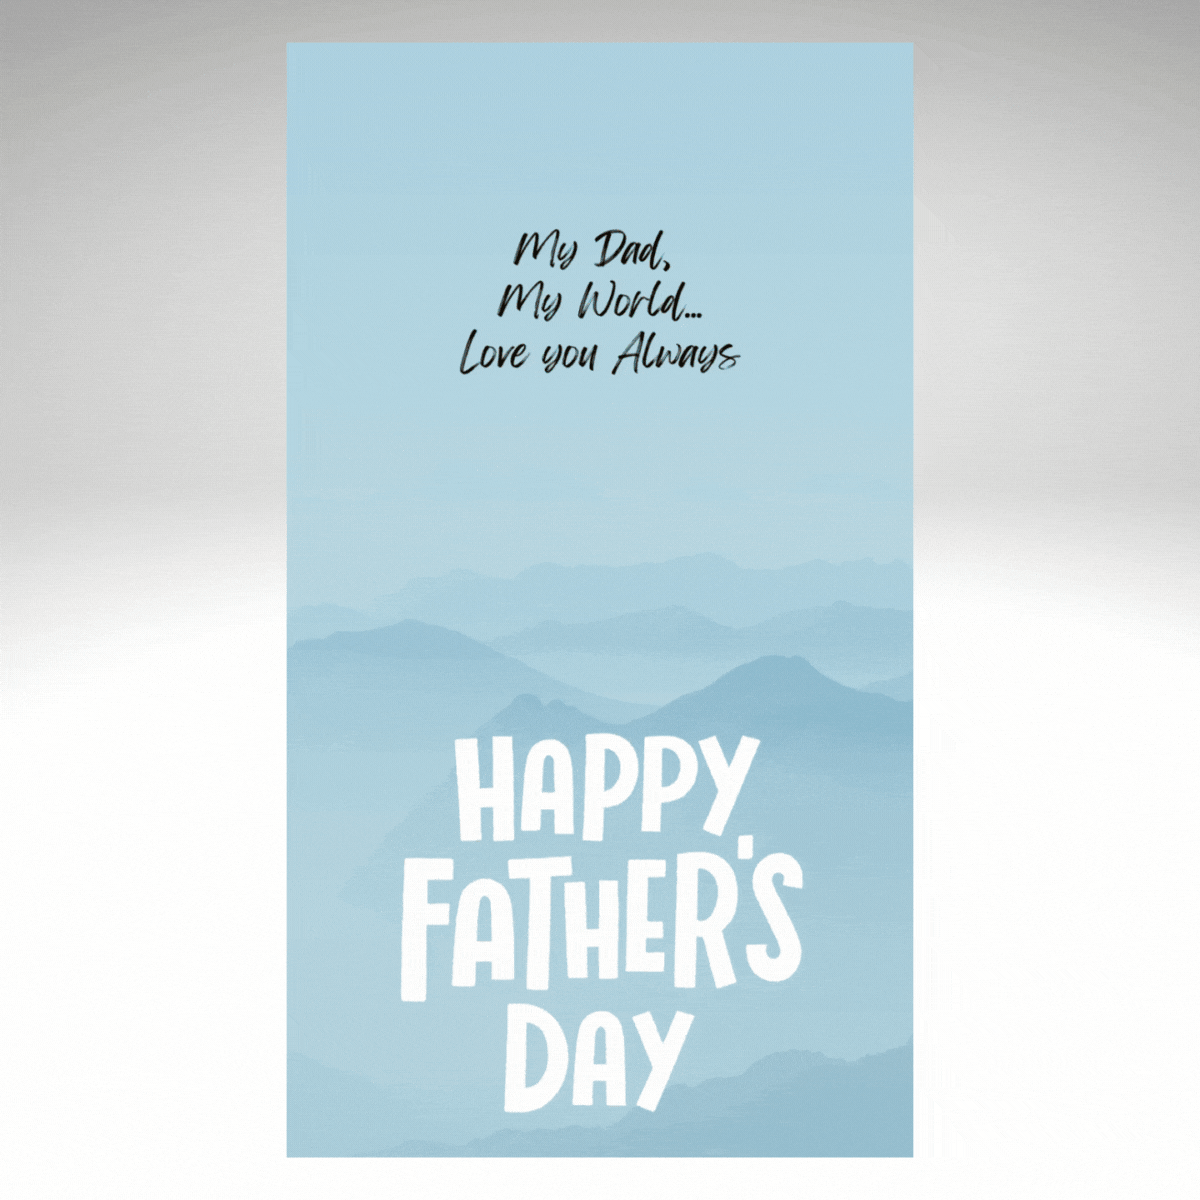 Fathers Day E-Card - Hot Air Balloon MP4 Video Message